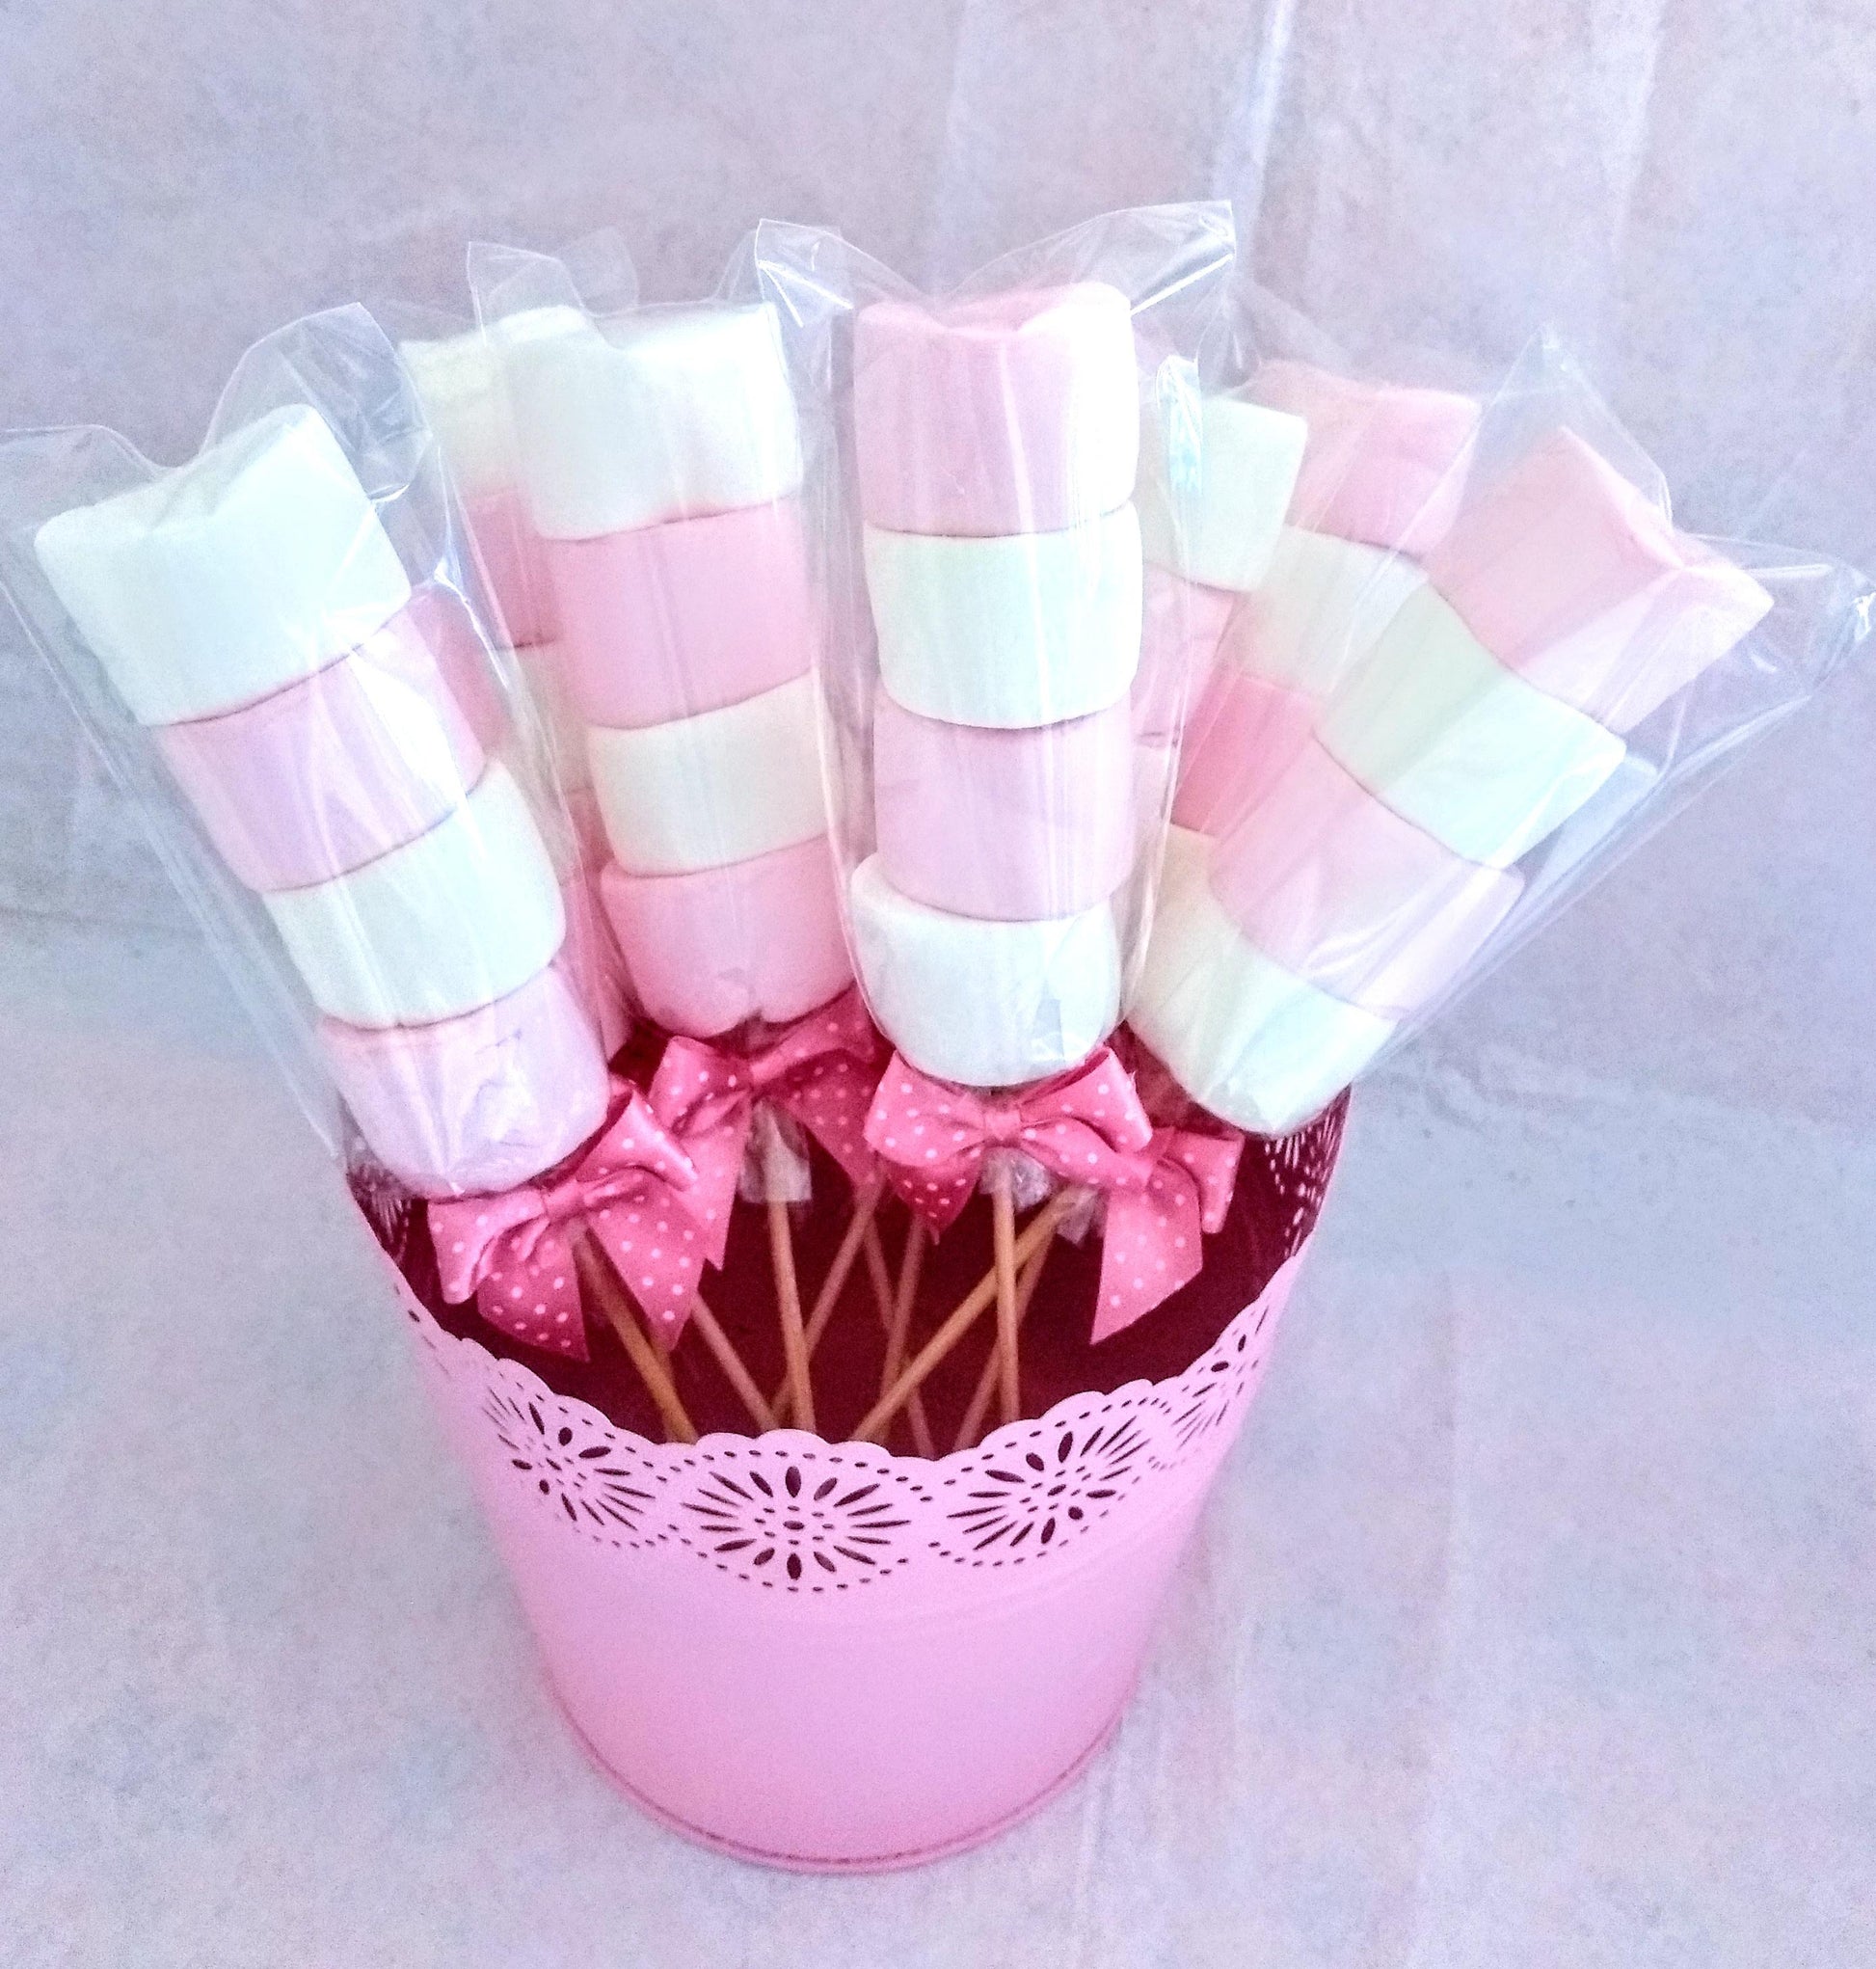 Pink and White Marshmallow Kebabs with personalised message in UK